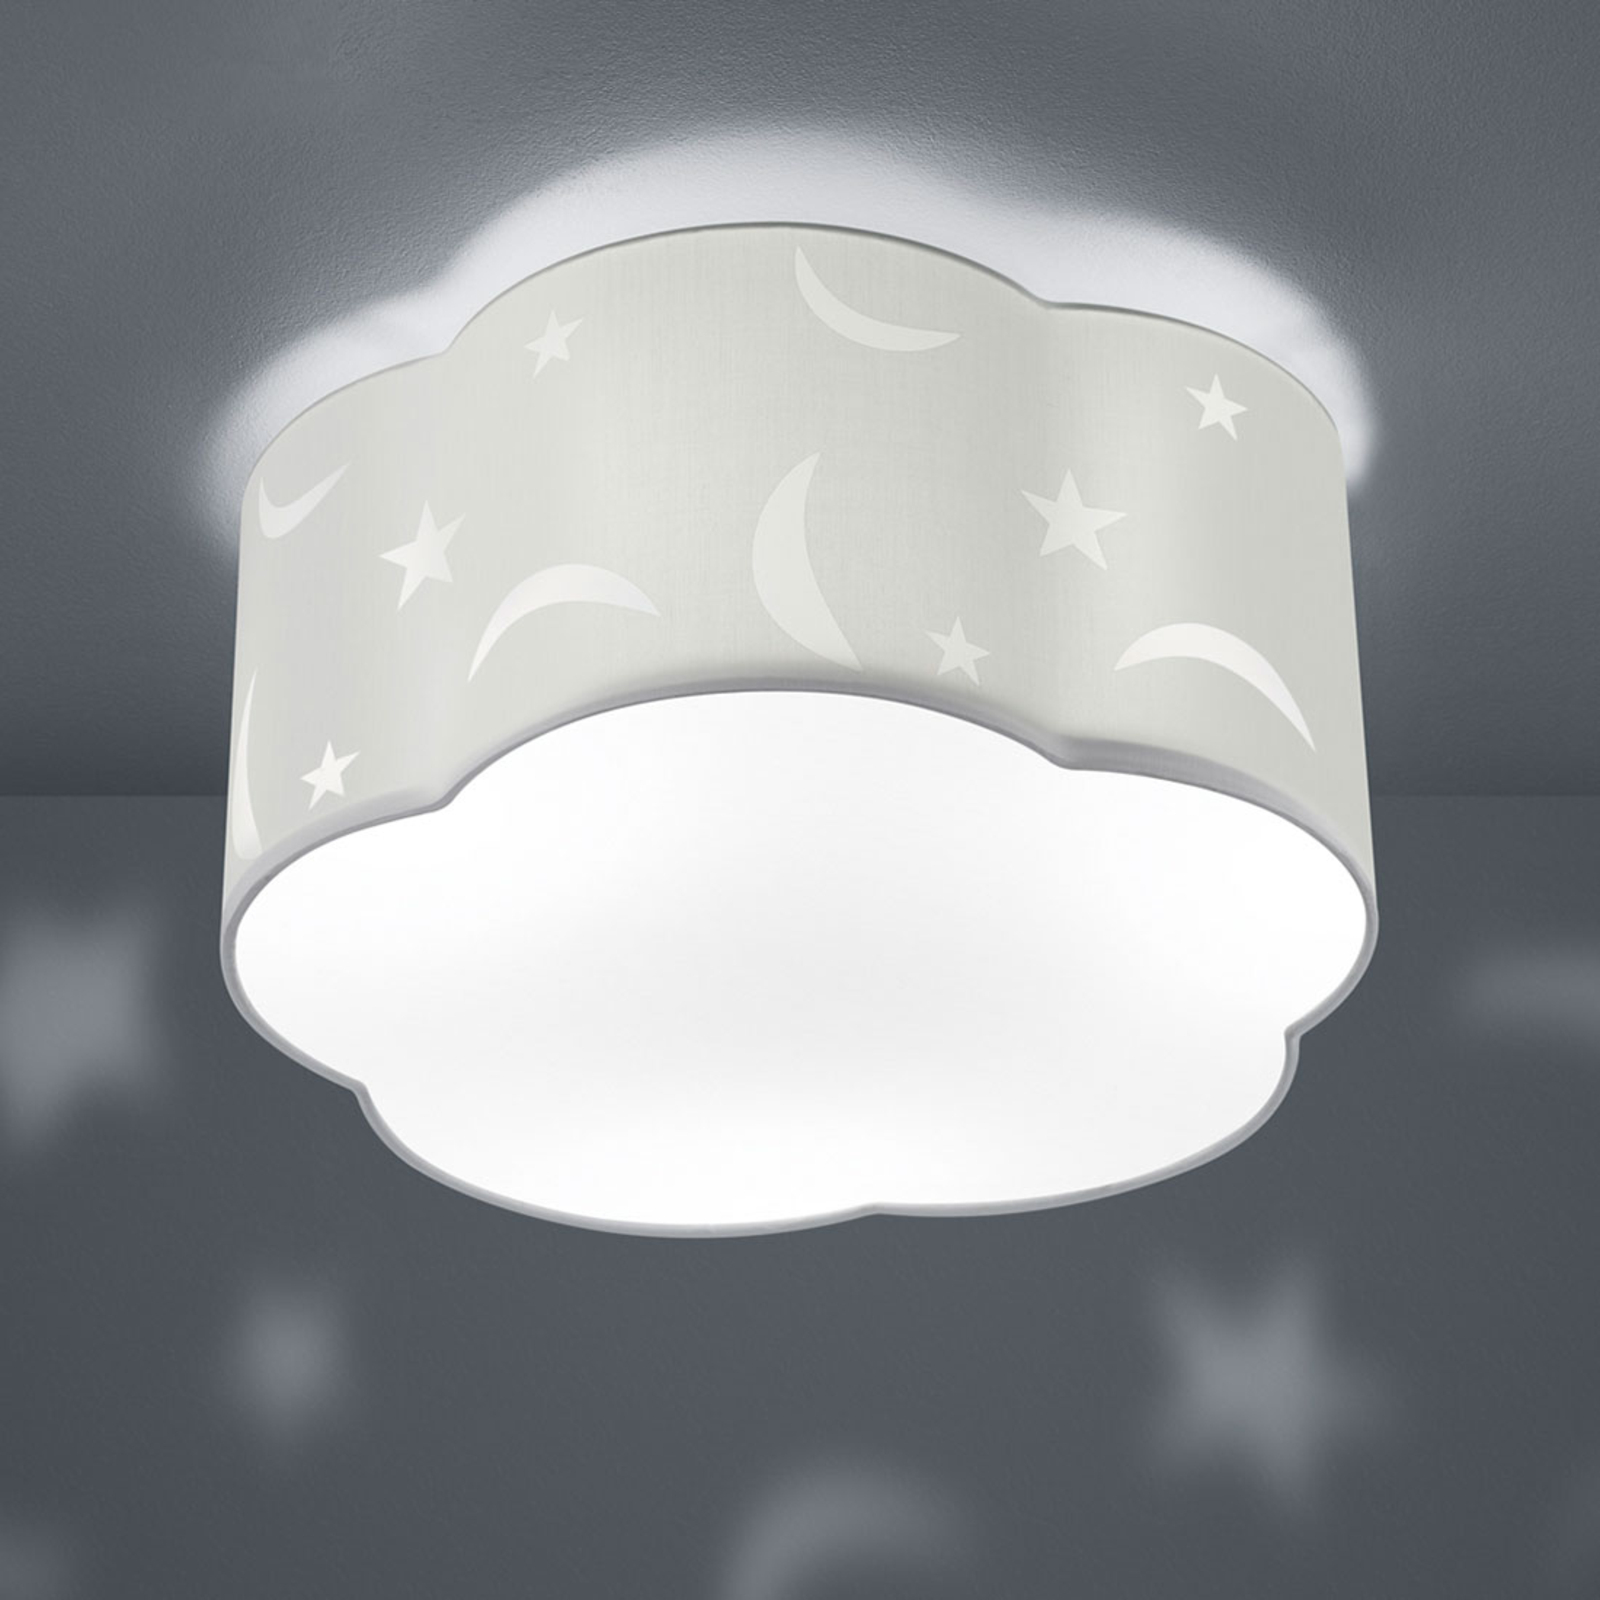 Moony ceiling lamp for a child’s room, white